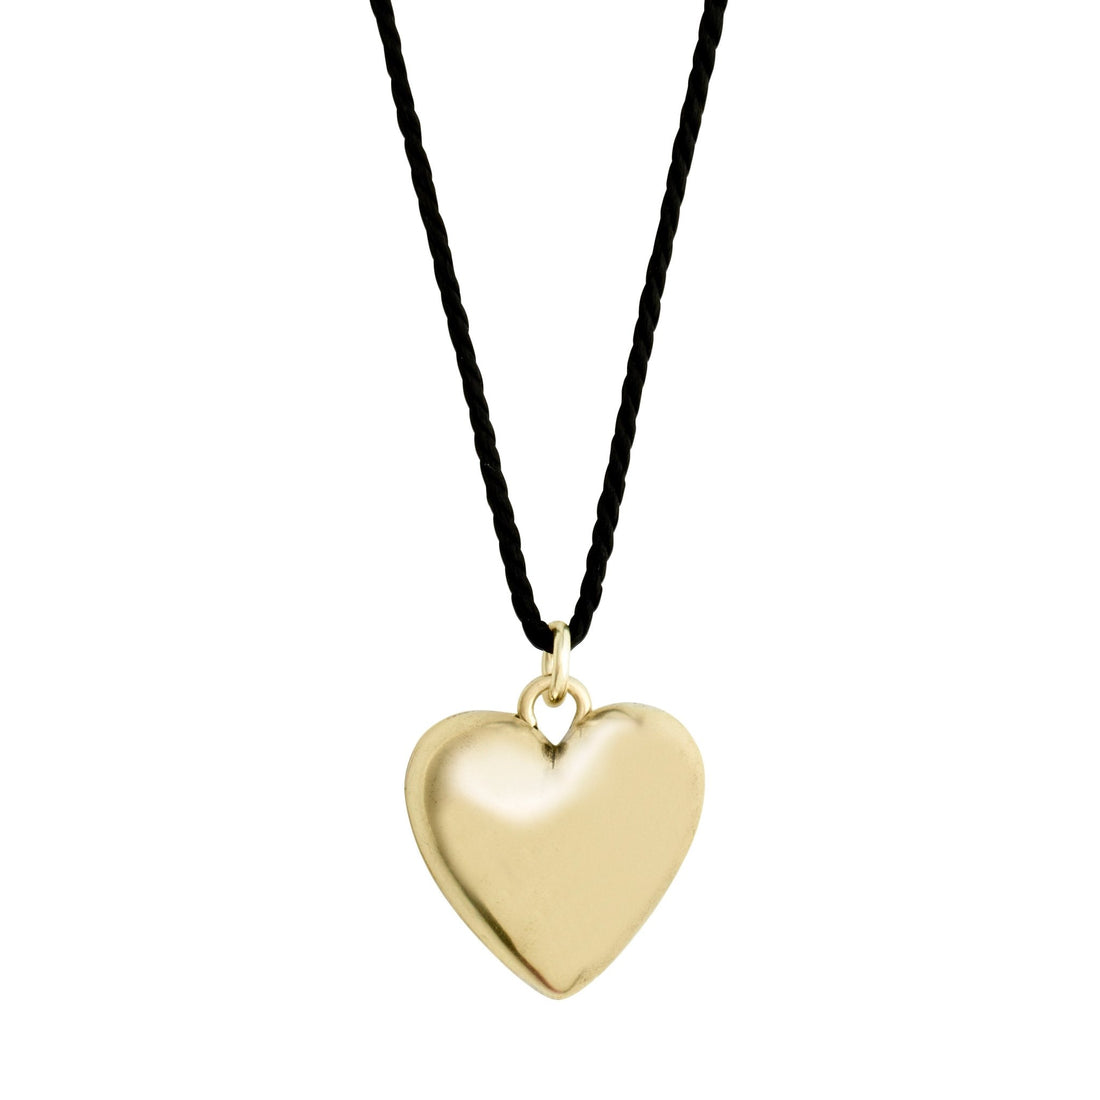 Reflect Recycled Heart Pendant Necklace - PILGRIM